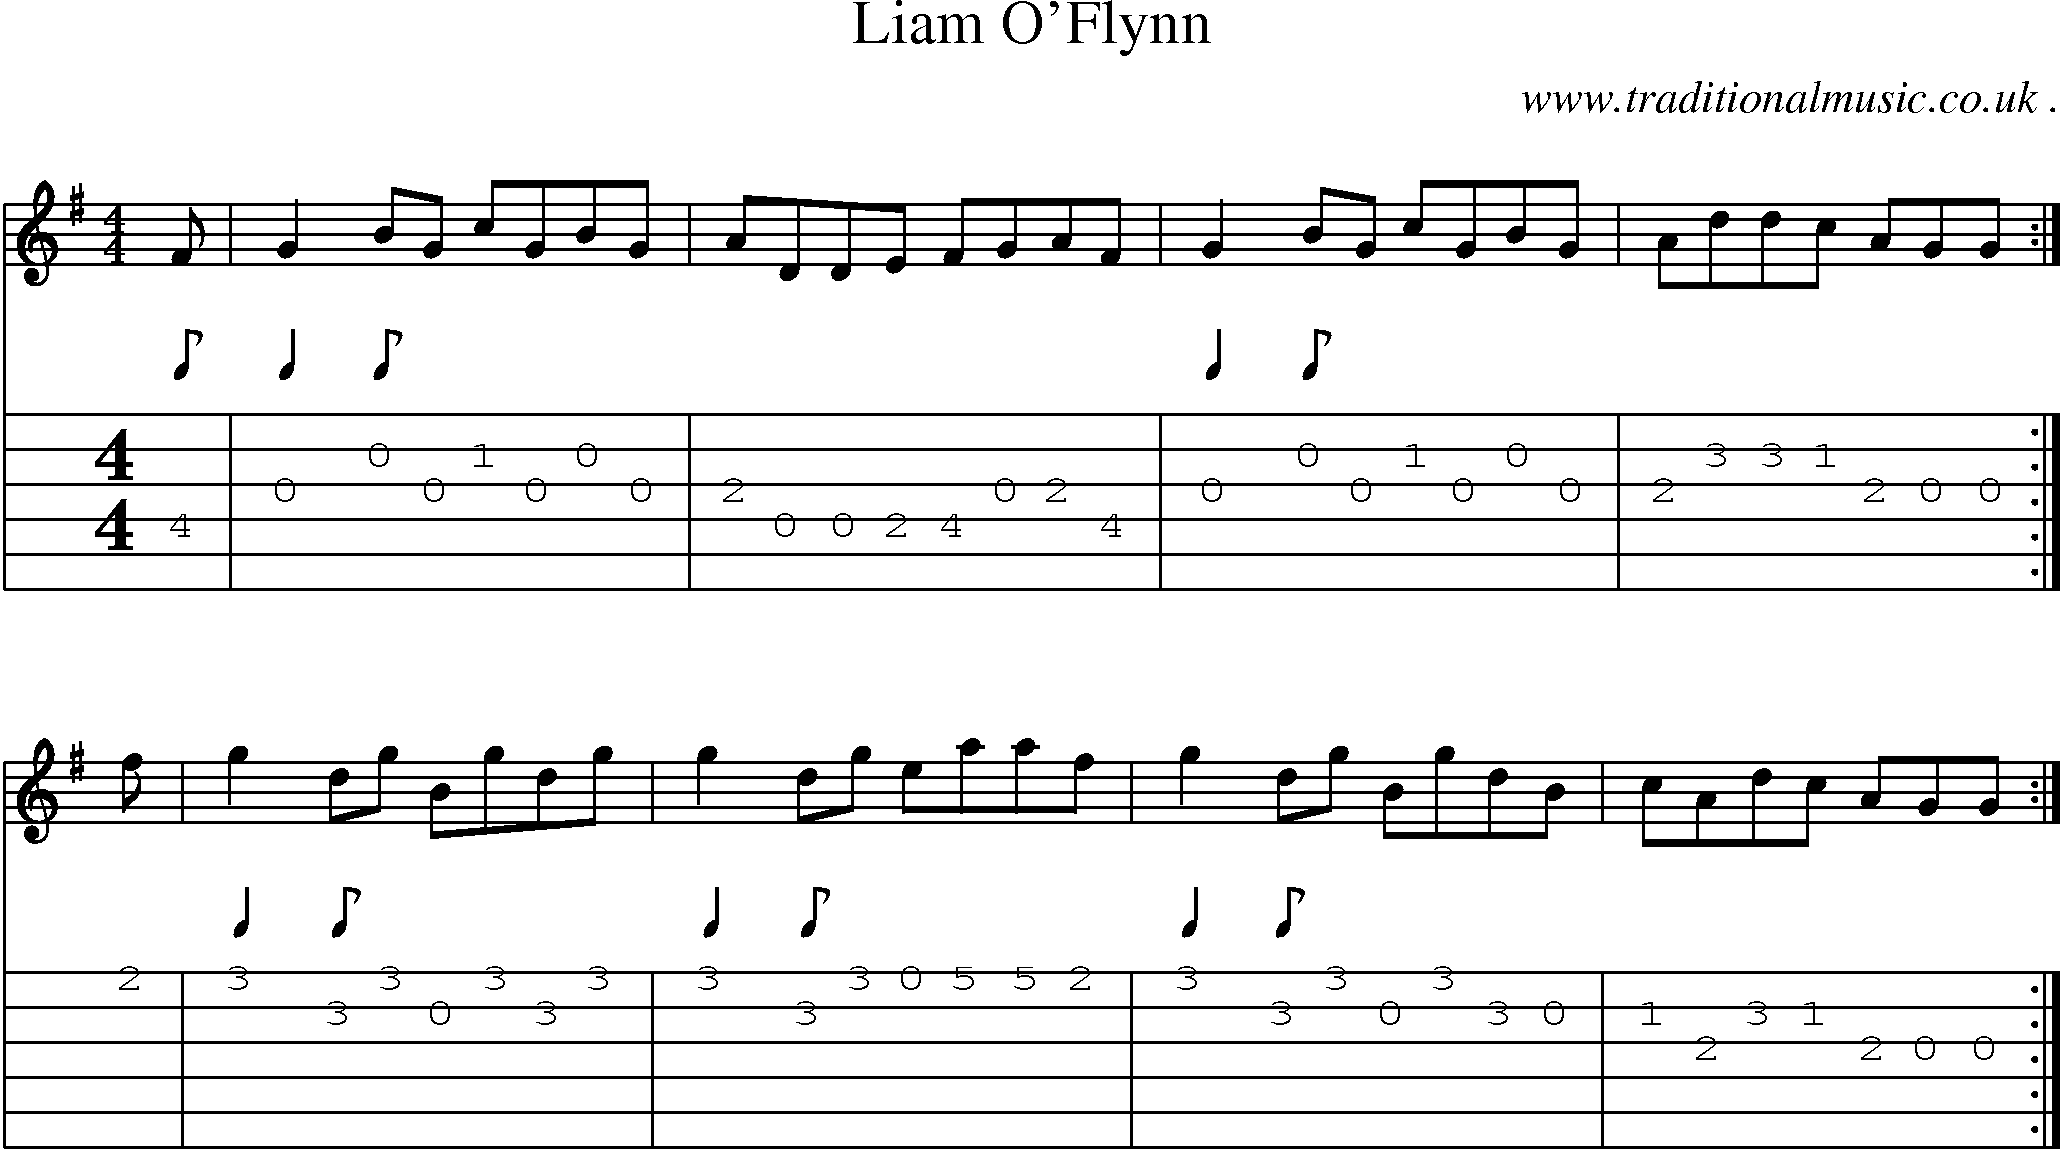 Sheet-Music and Guitar Tabs for Liam Oflynn